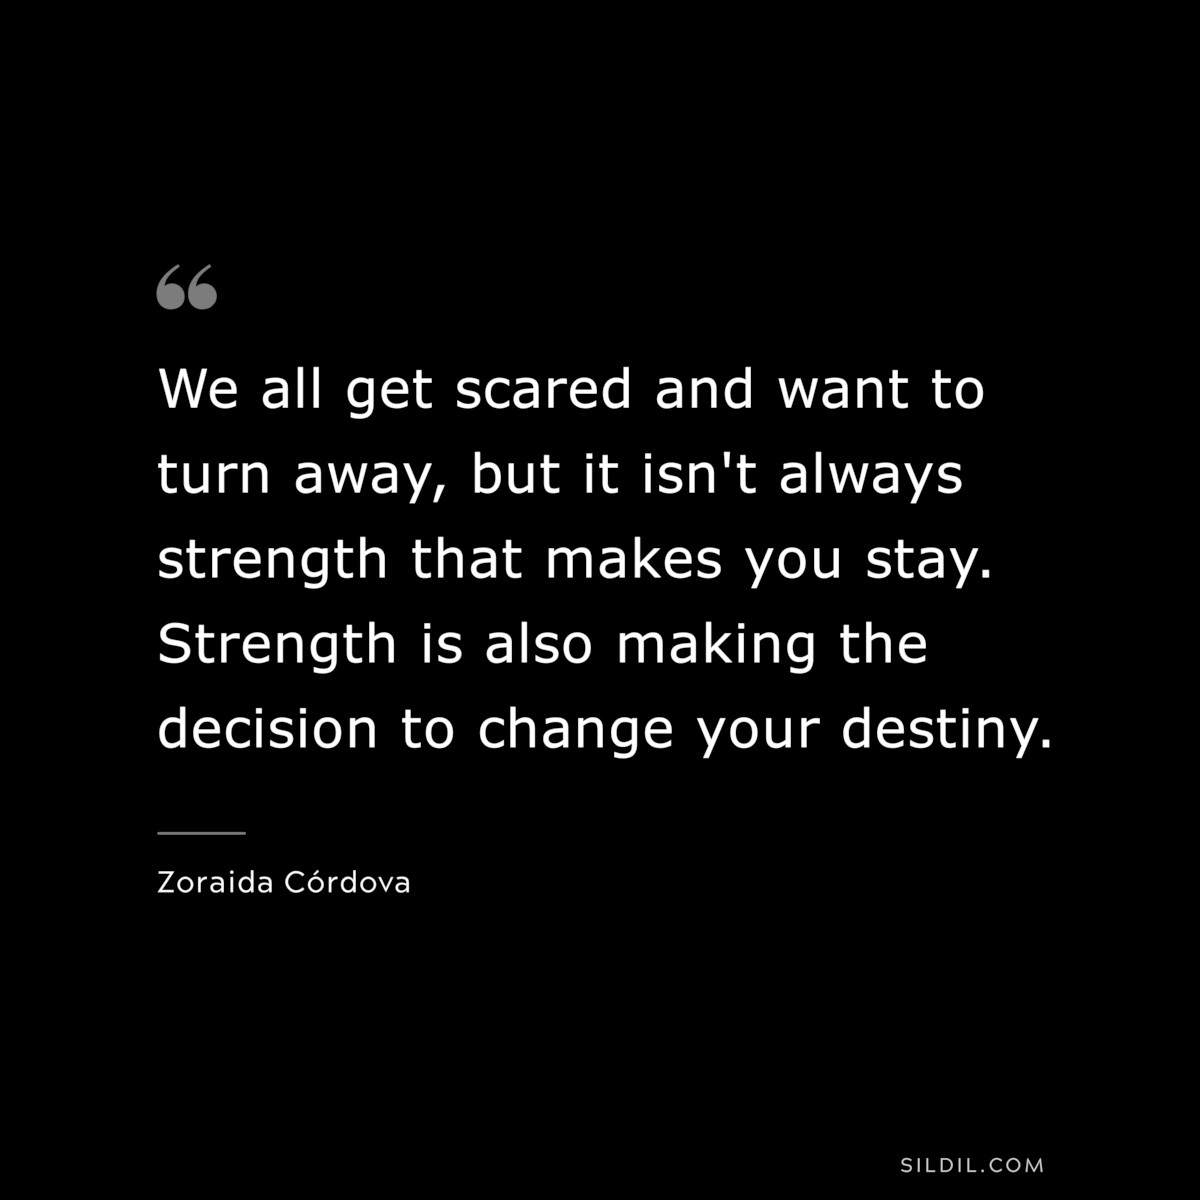 We all get scared and want to turn away, but it isn't always strength that makes you stay. Strength is also making the decision to change your destiny. ― Zoraida Córdova